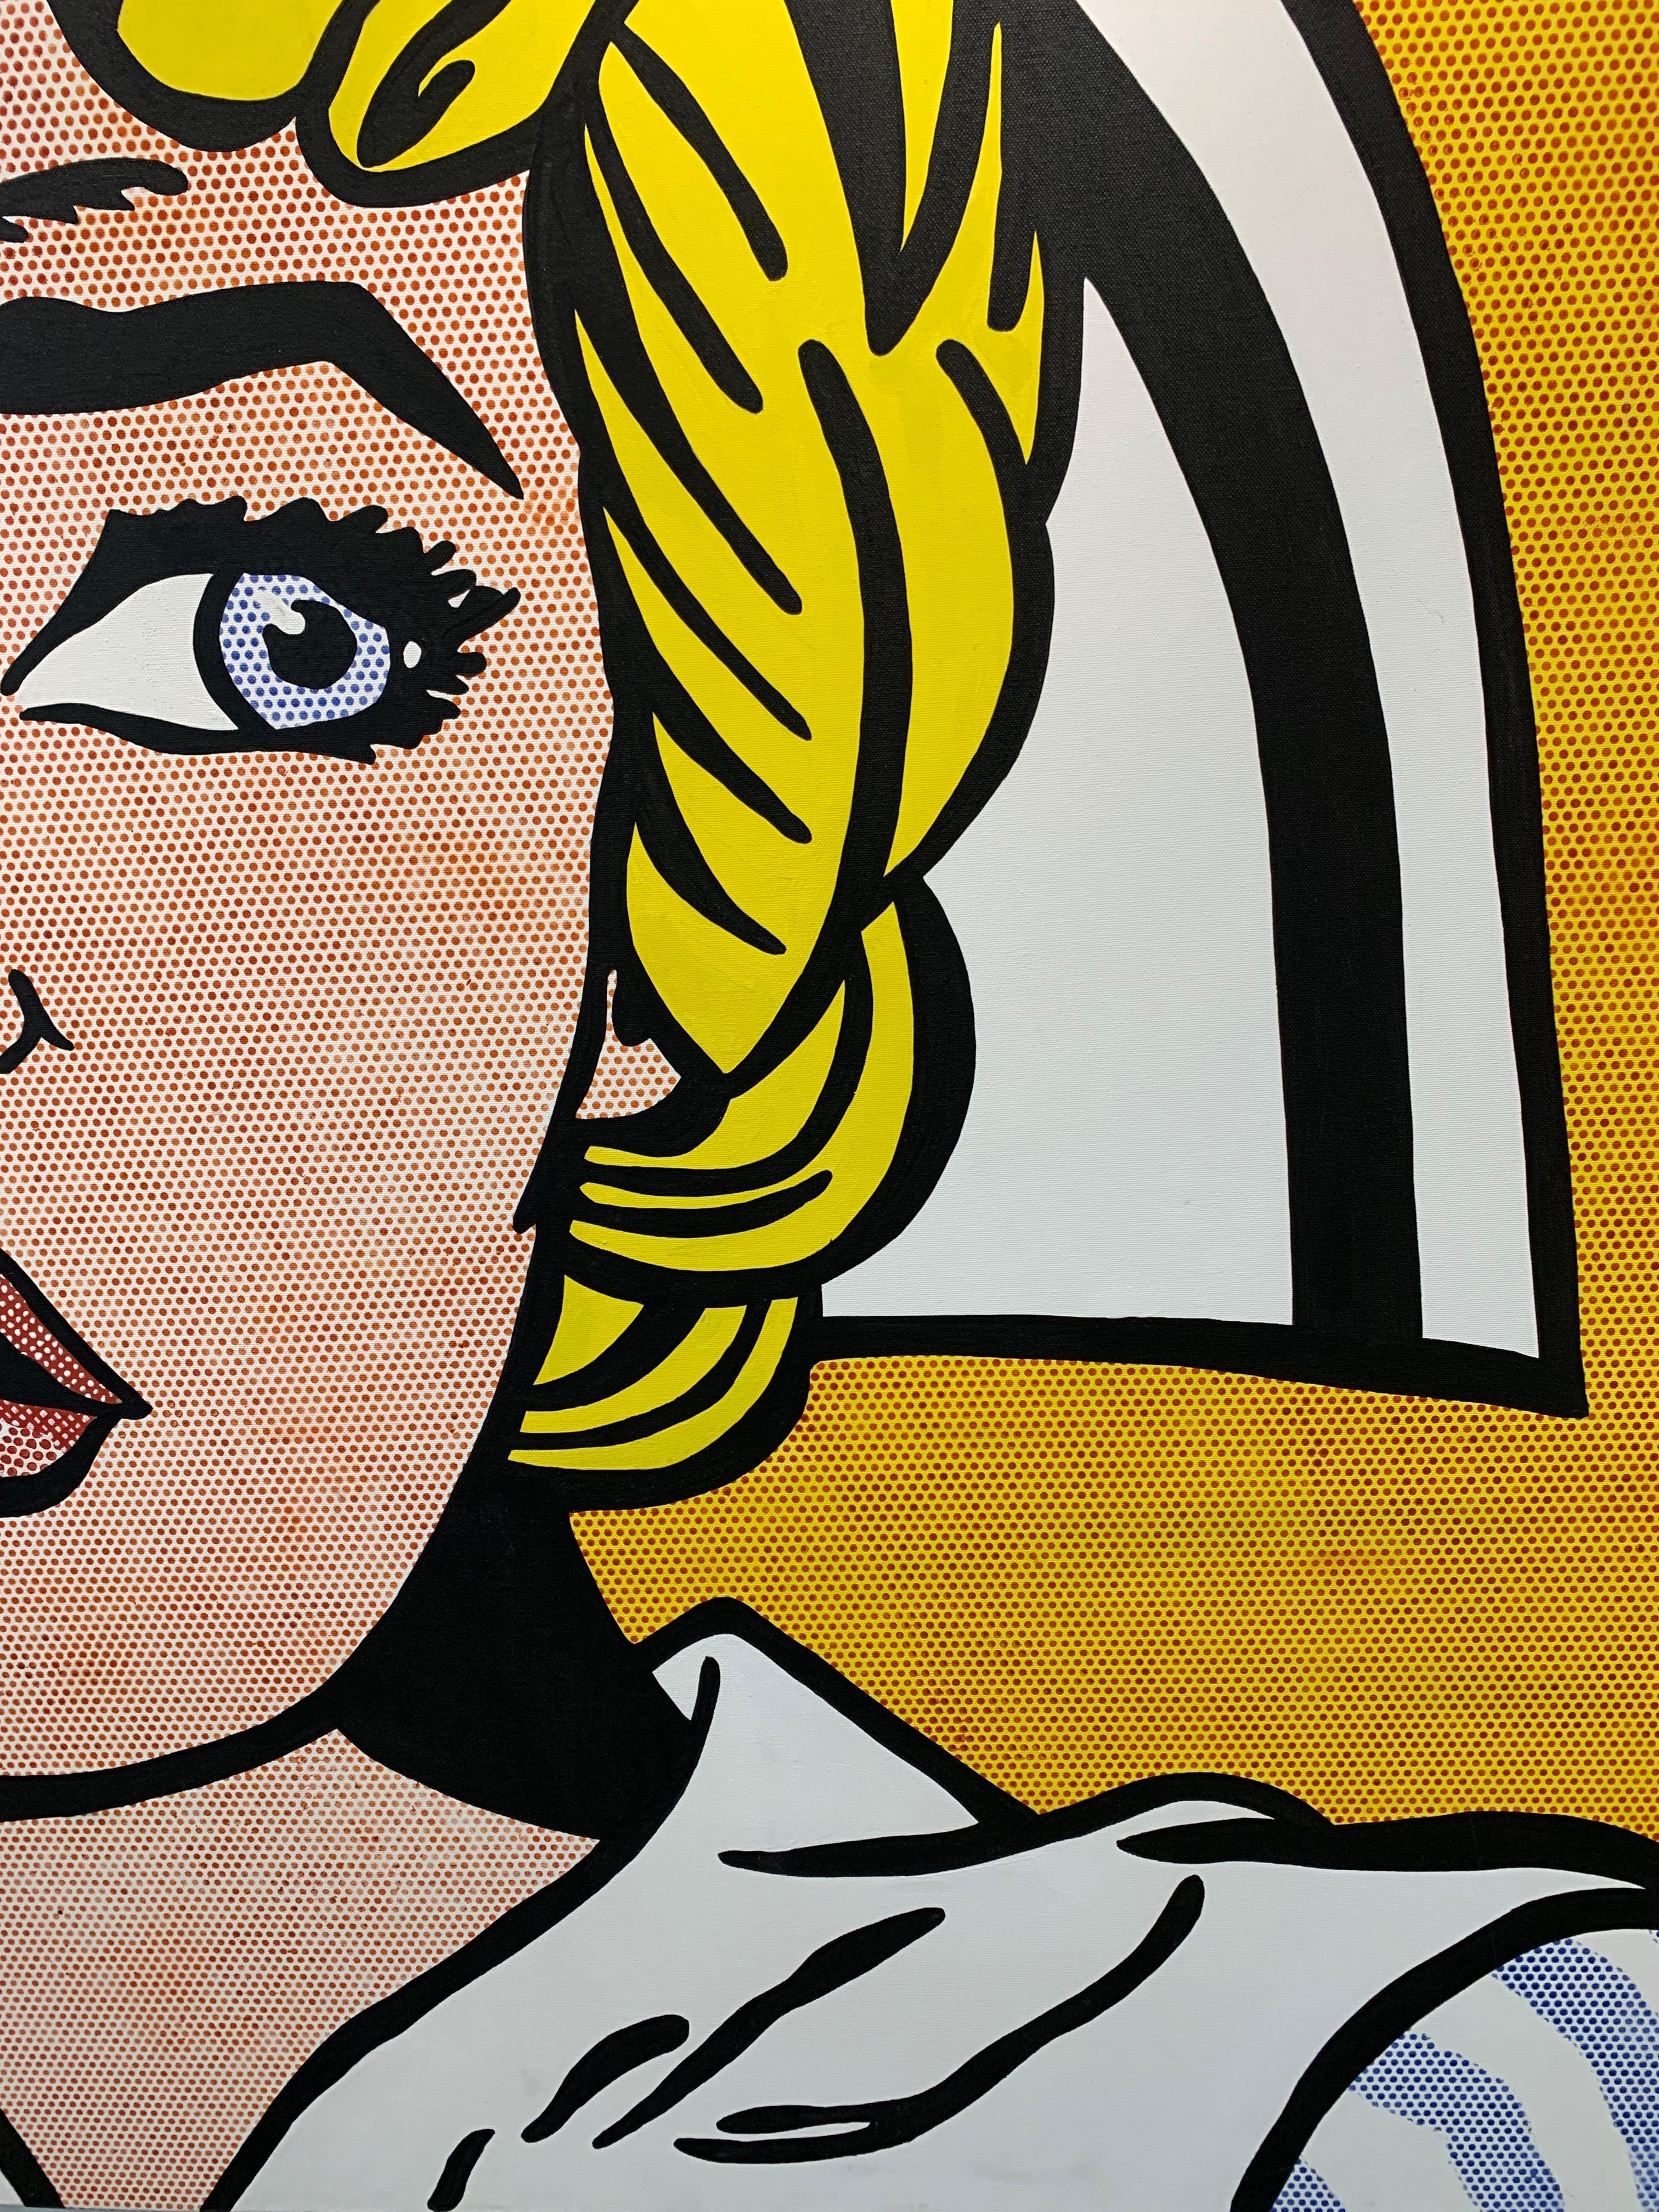 Pop Art painting girl with blond hair based on Roy Lichtenstein For Sale 3